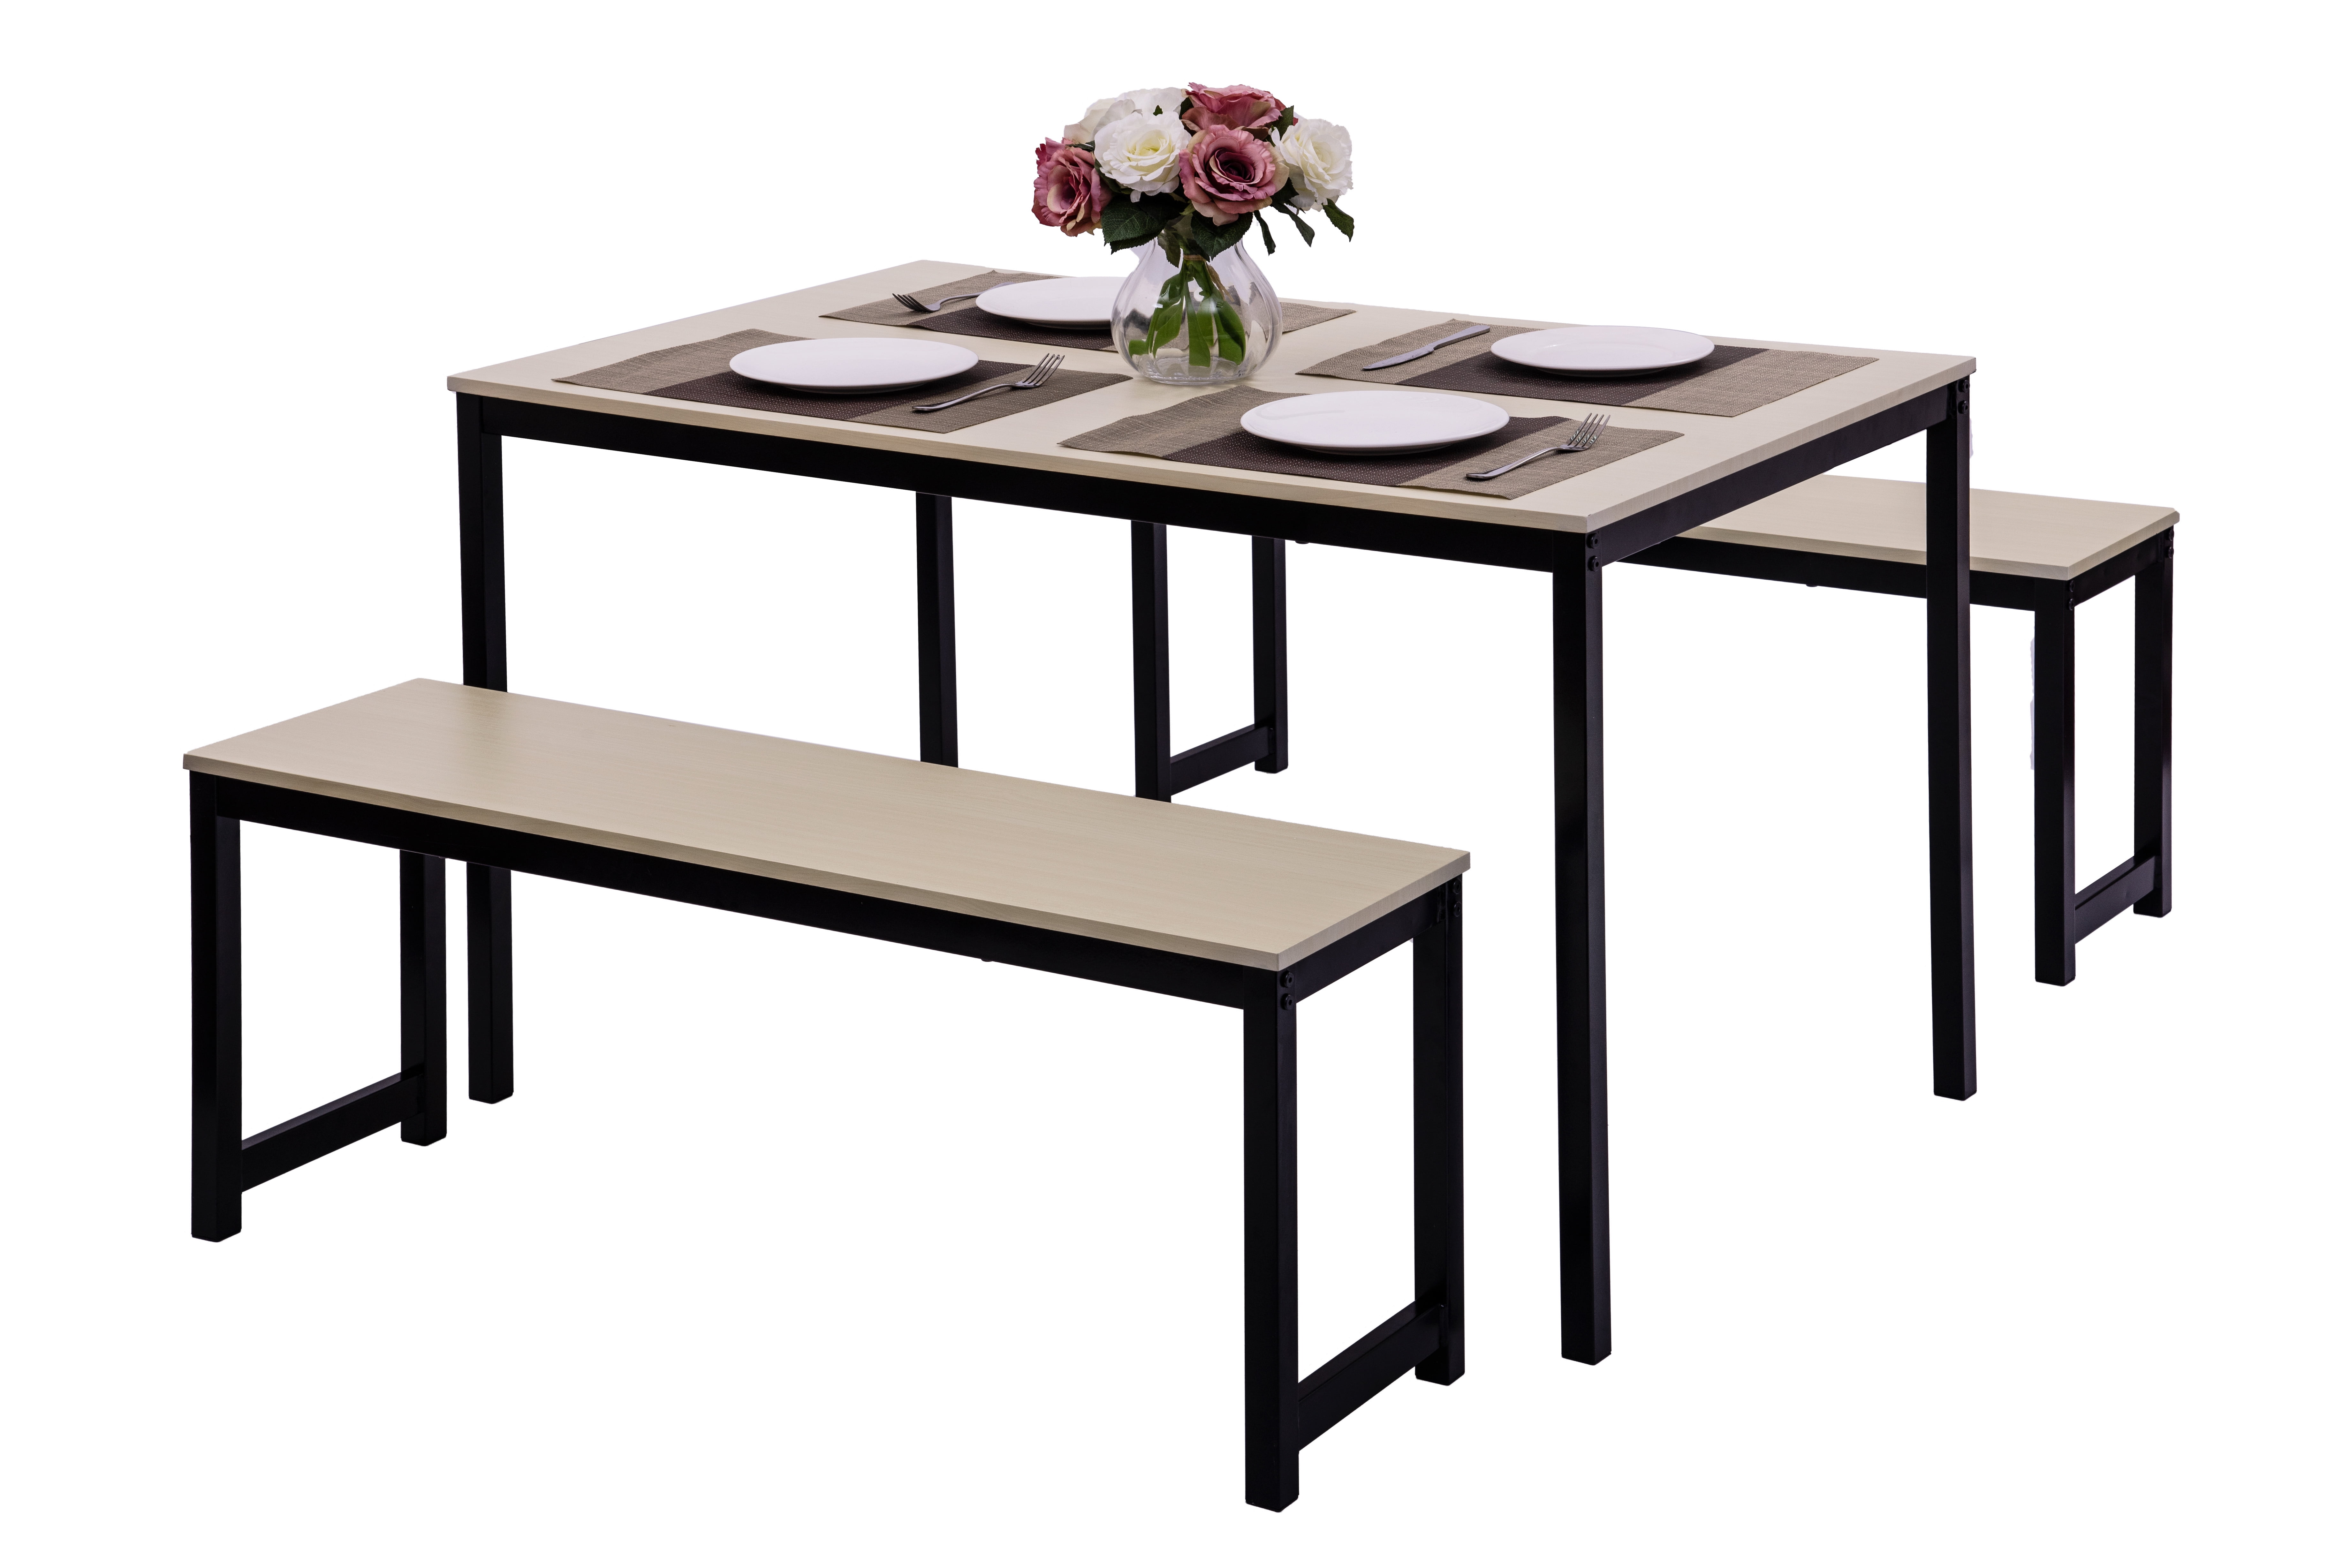 Kitchen Table Set, 3 Piece Dining Table and Benches, Small Rectangle